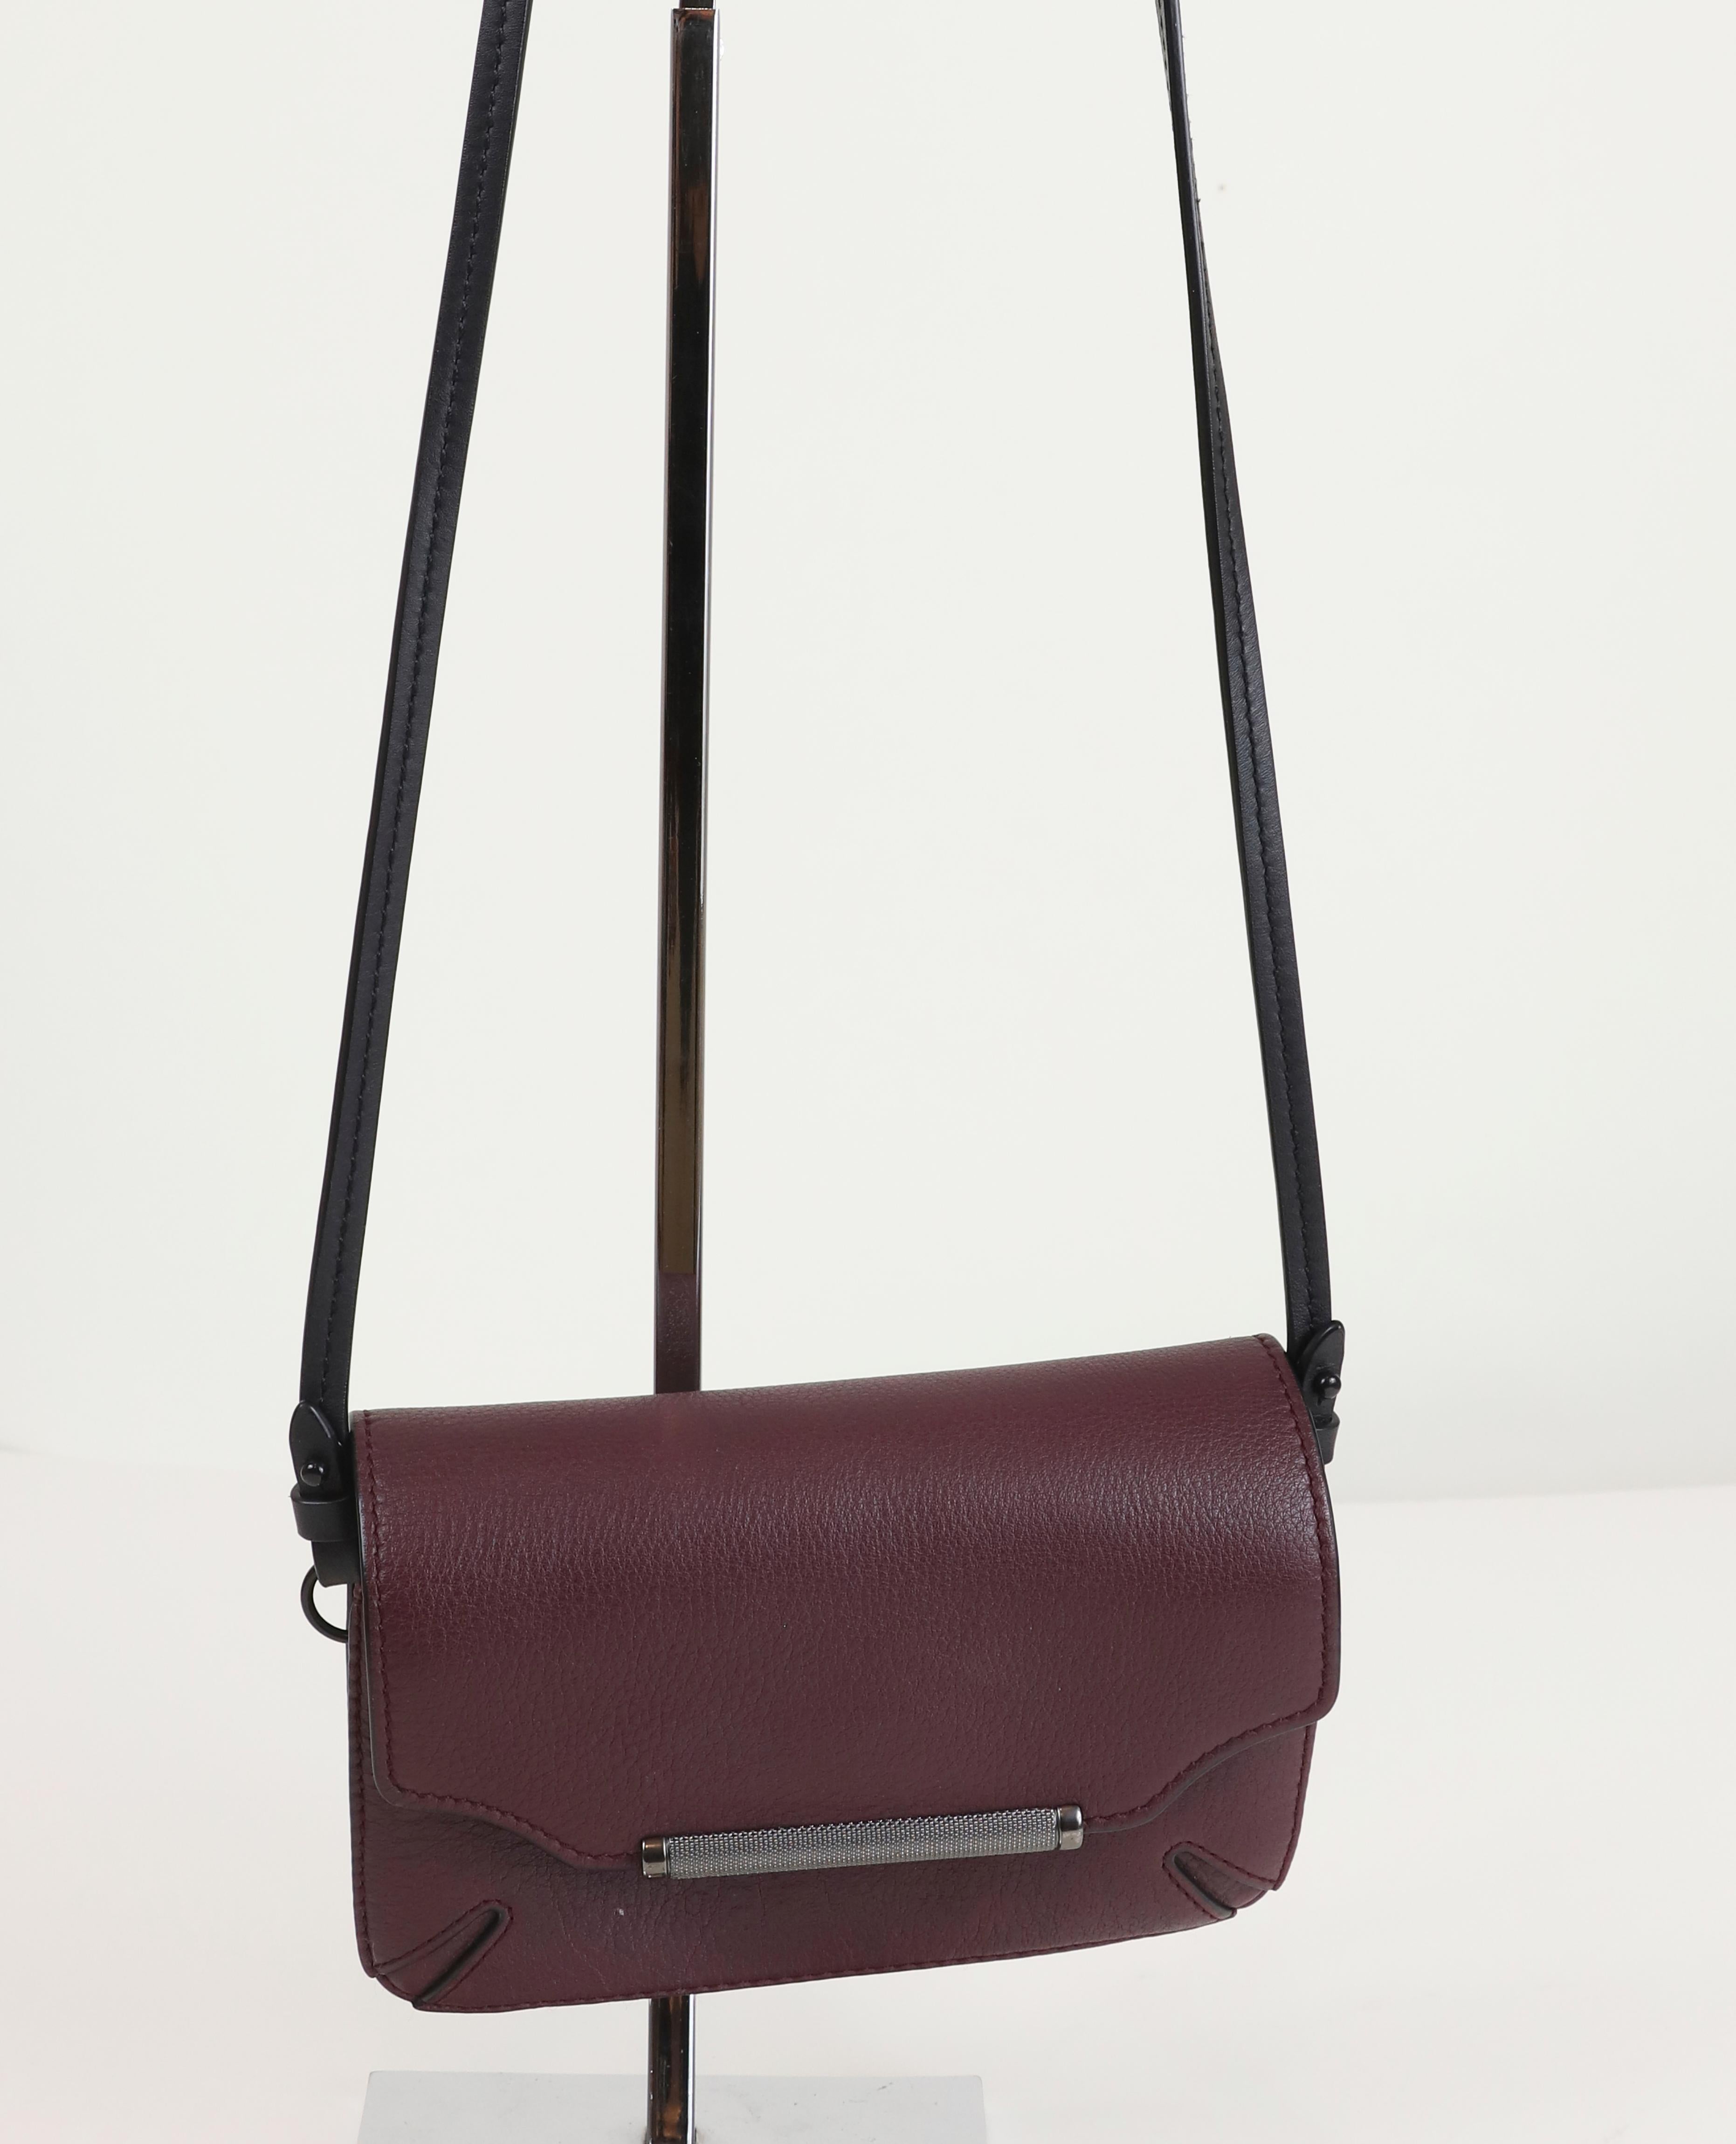 Great quality crossbody bag with very versatile color. The exact year of manufacture is unknown.